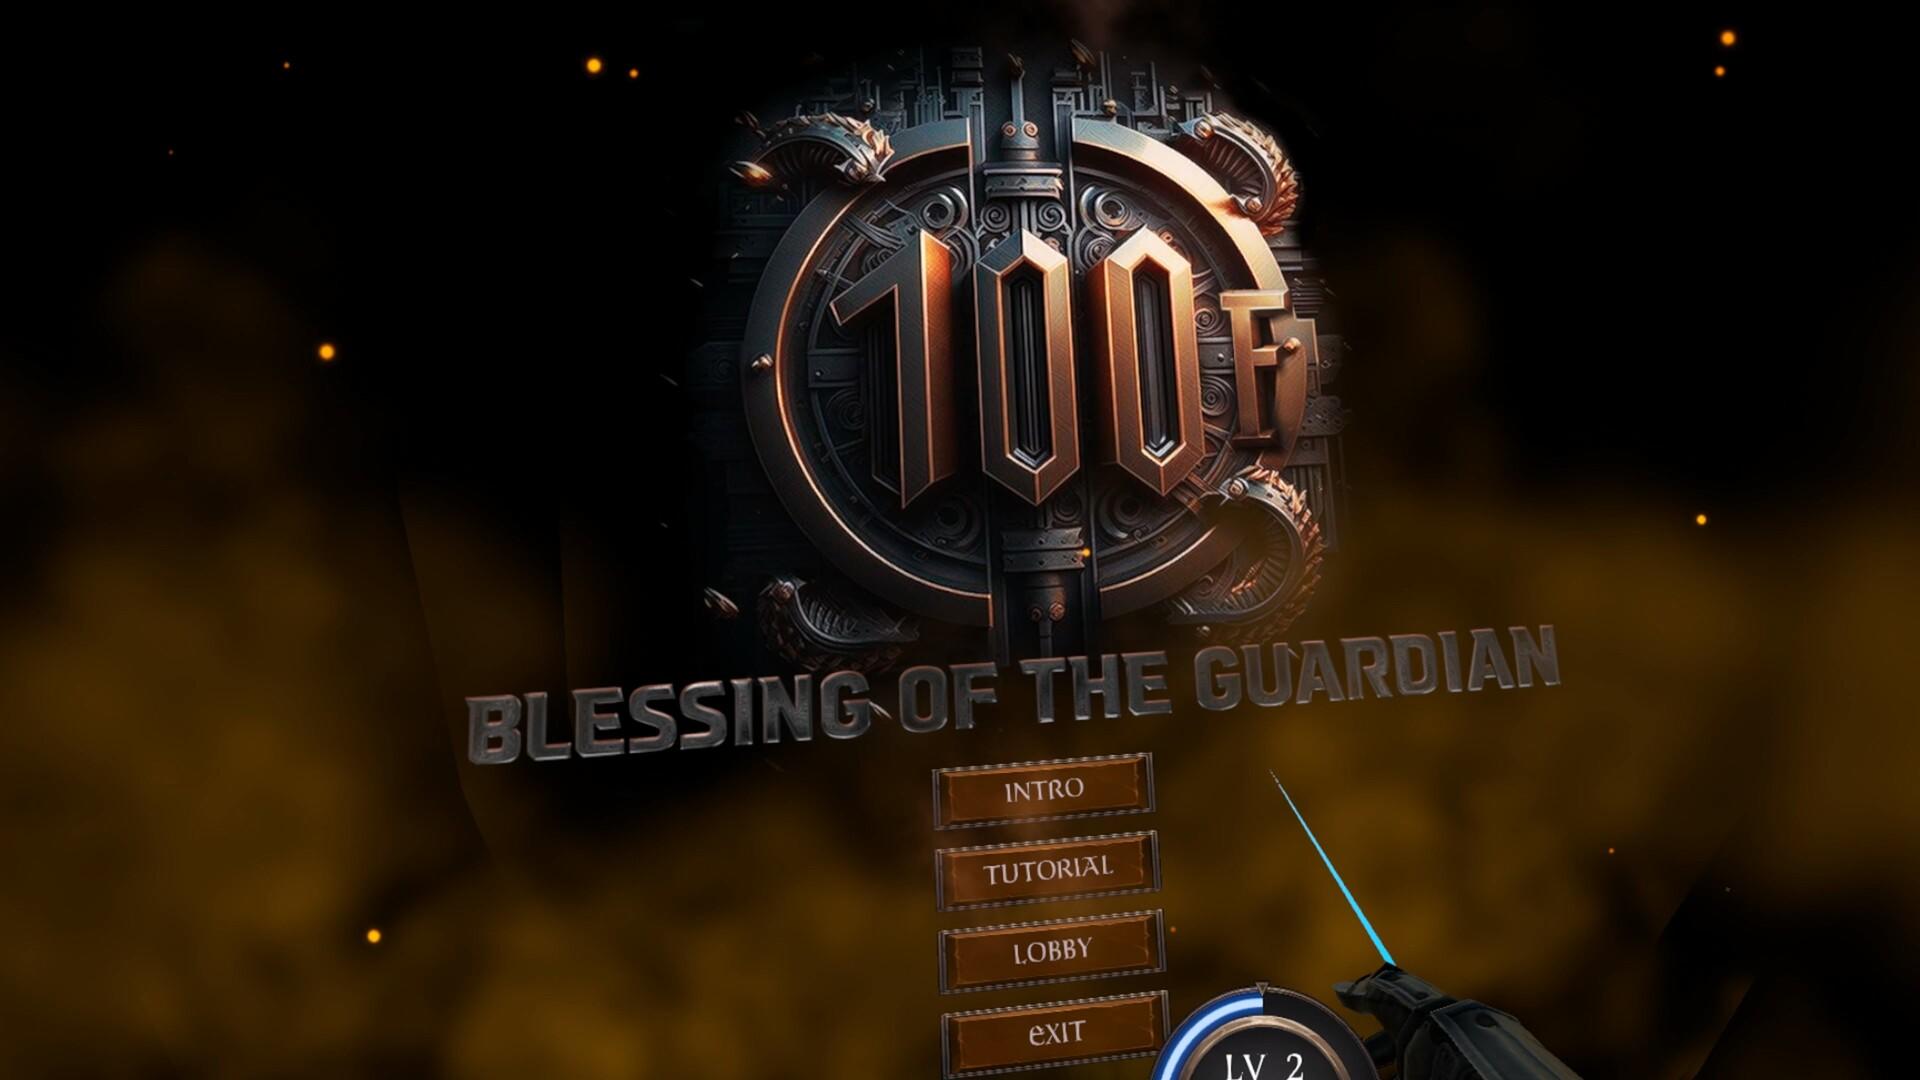 100F BLESSING OF THE GUARDIAN 게임 스크린 샷